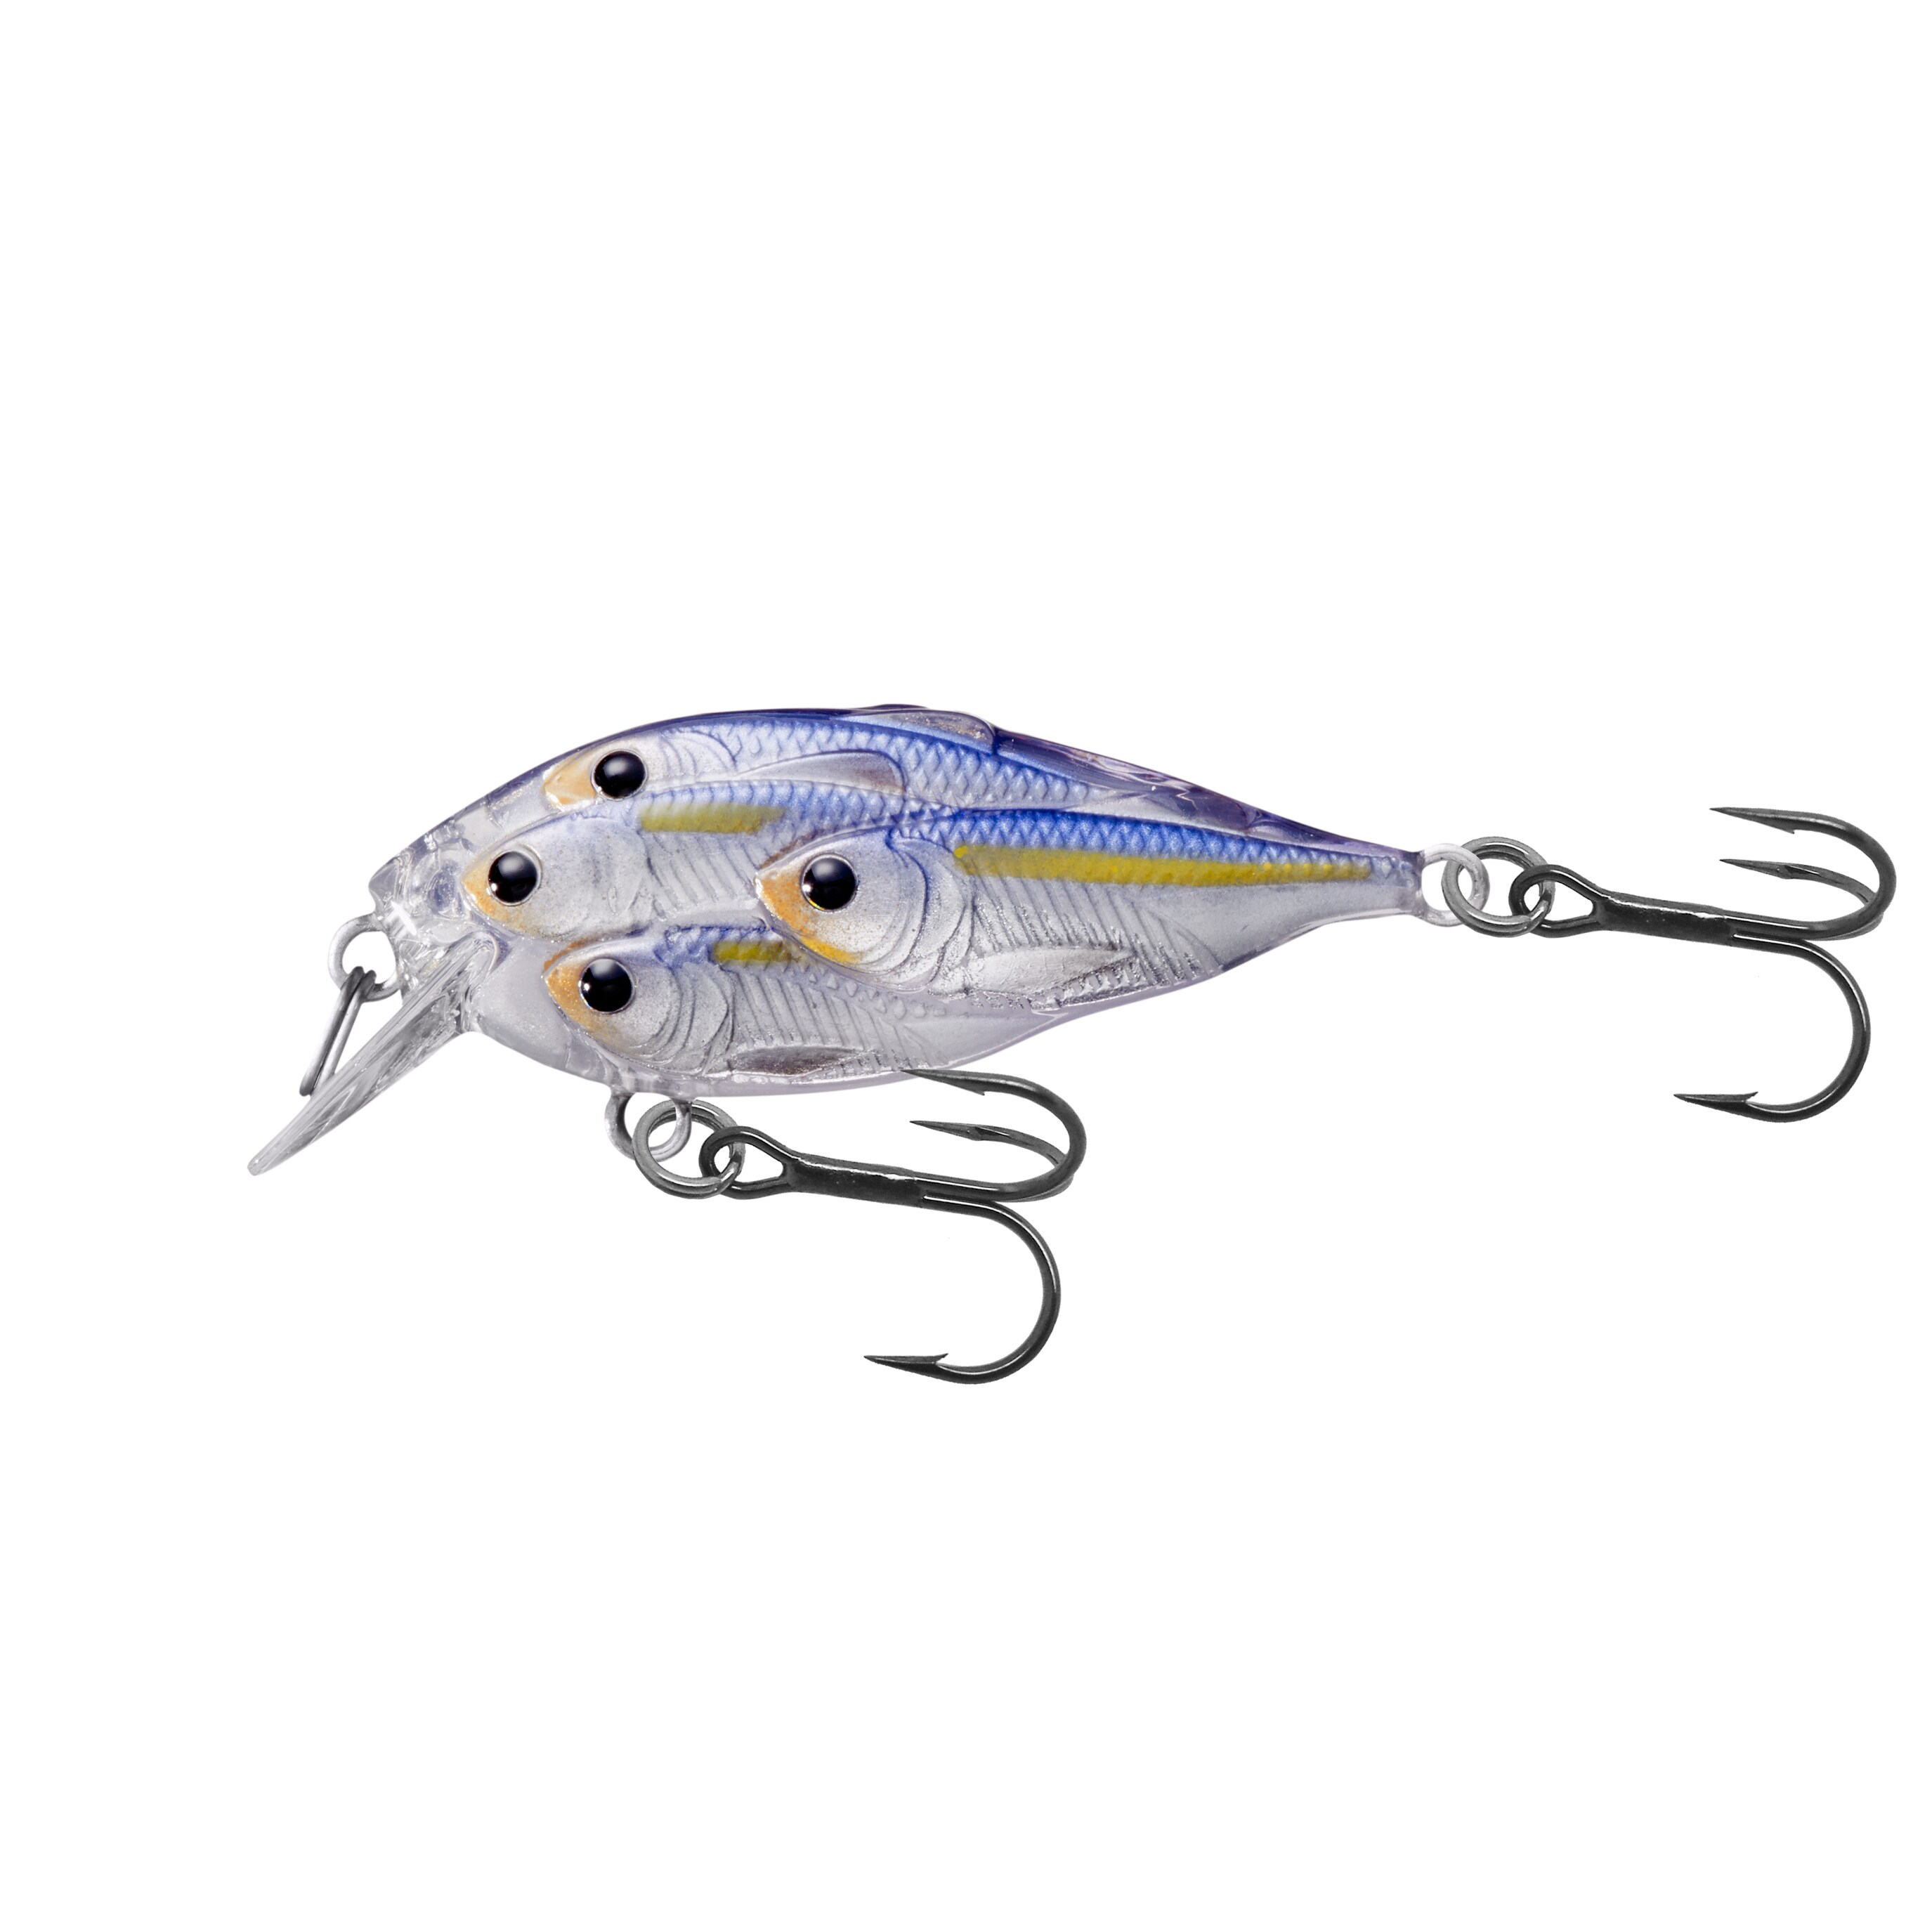 Koppers Live Target Yearling Baitball Squarebill 1.875 inch   17312217